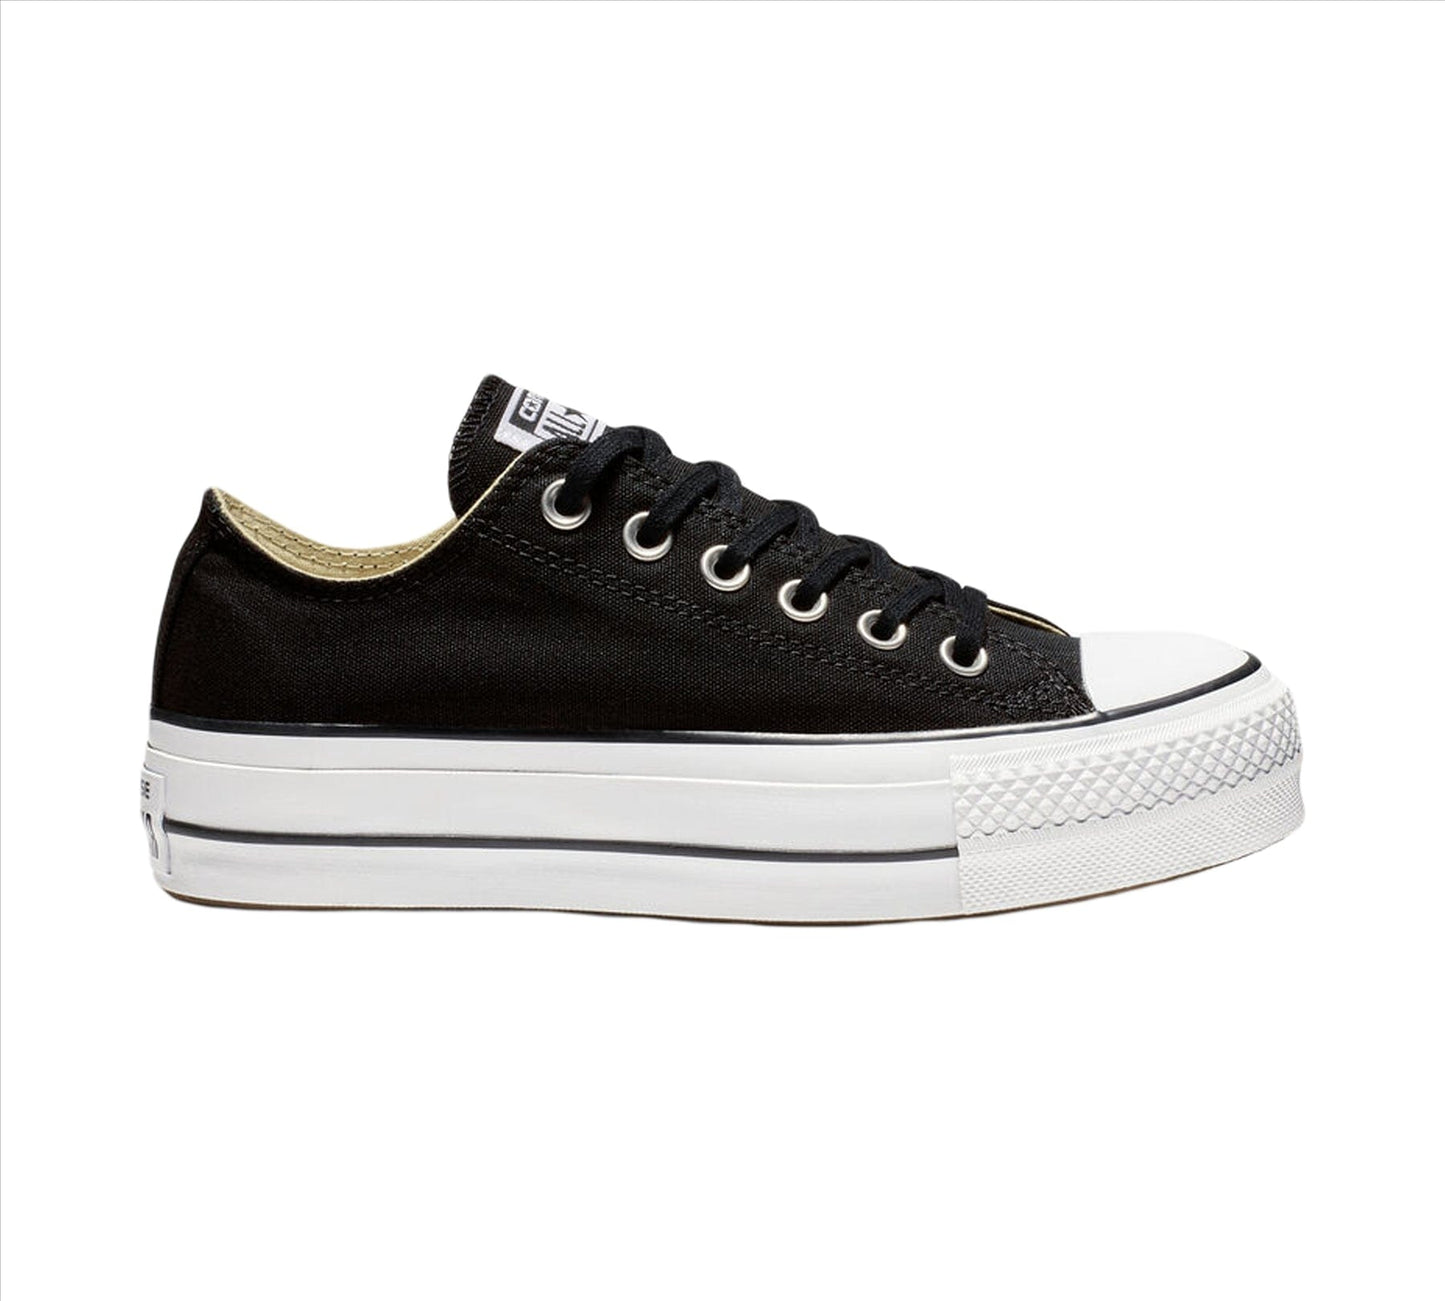 Converse Chuck Taylor All Star Lift 560250C Trainers Black UK 3-8